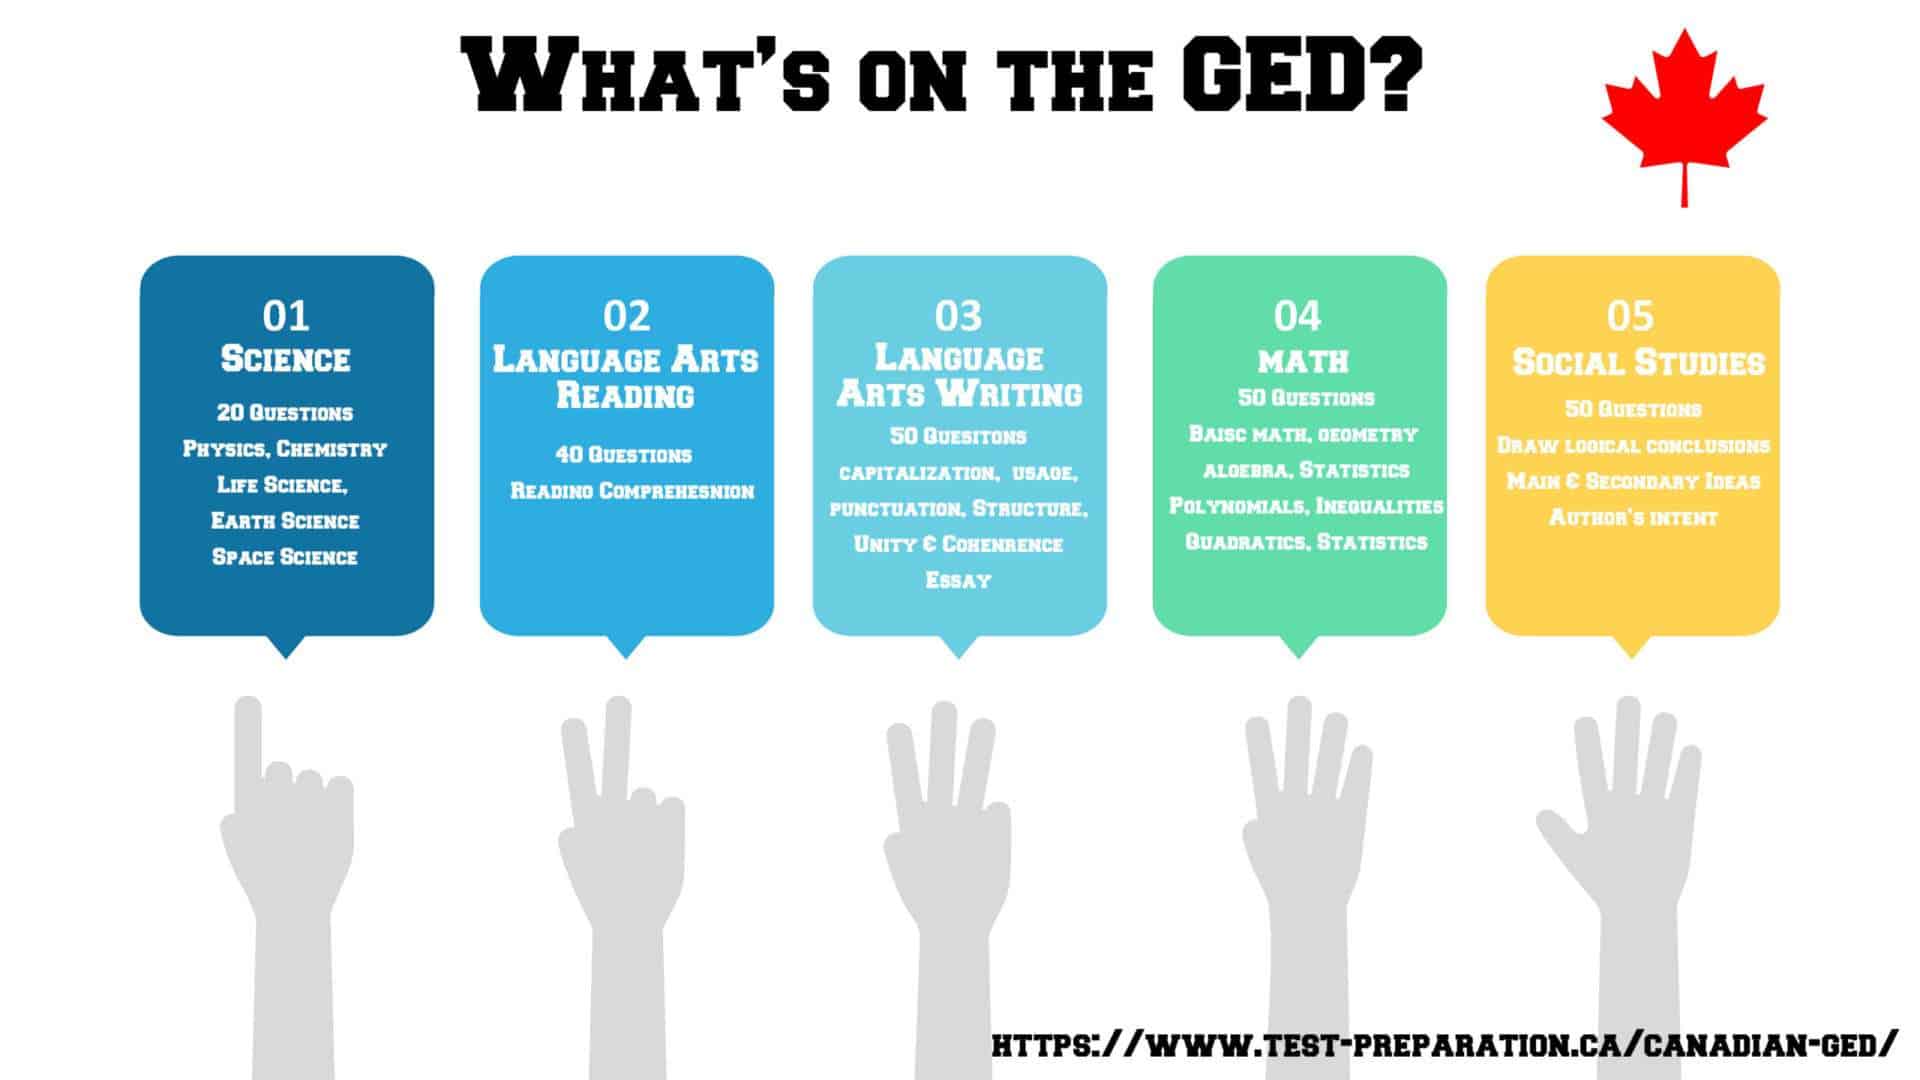 Canadian GED Test Content